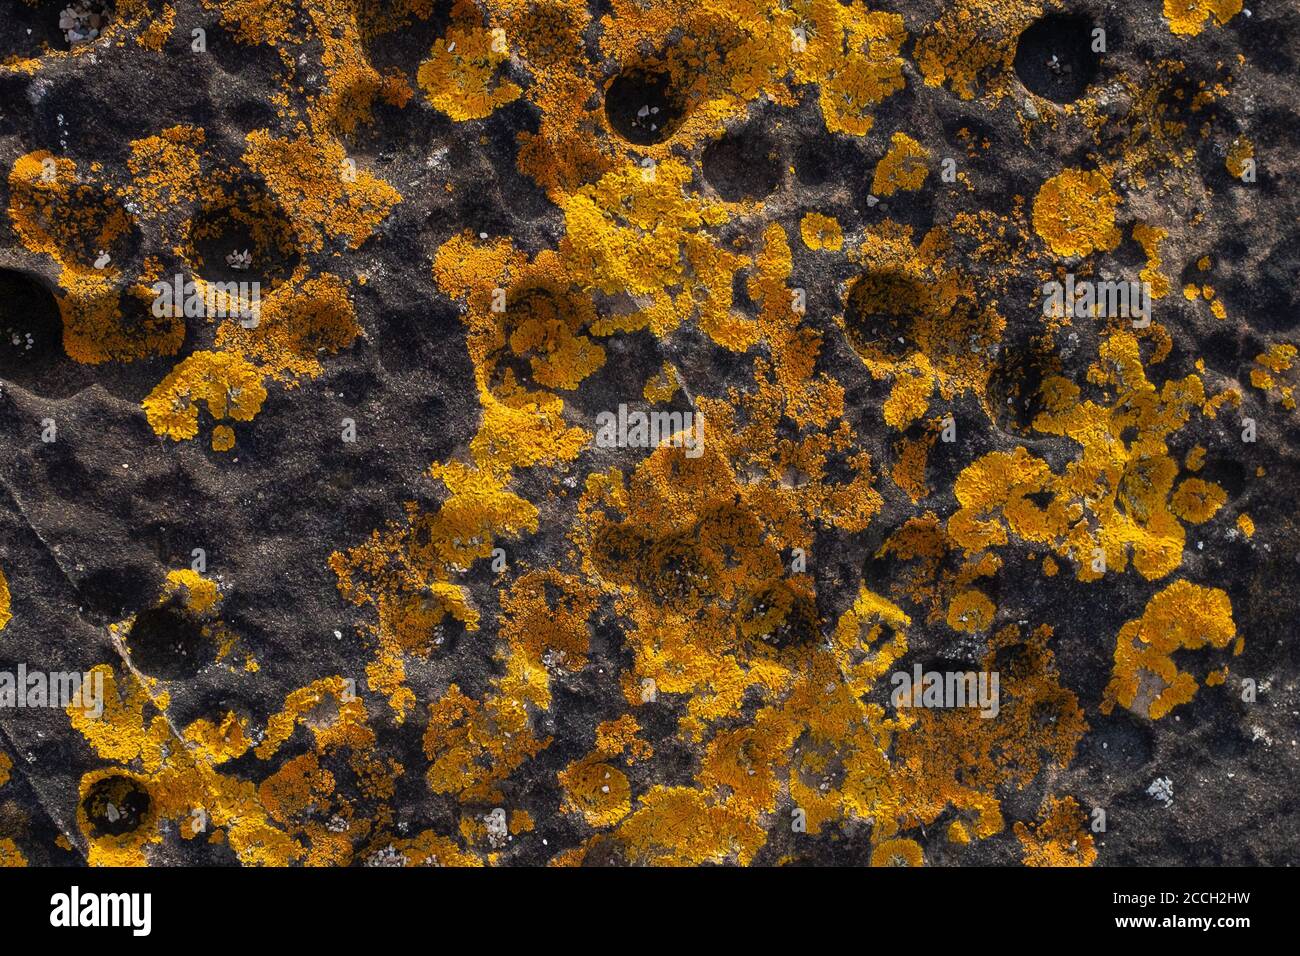 Background of random organic pattern of bright coloured lichen on a rock with circular indentations Stock Photo